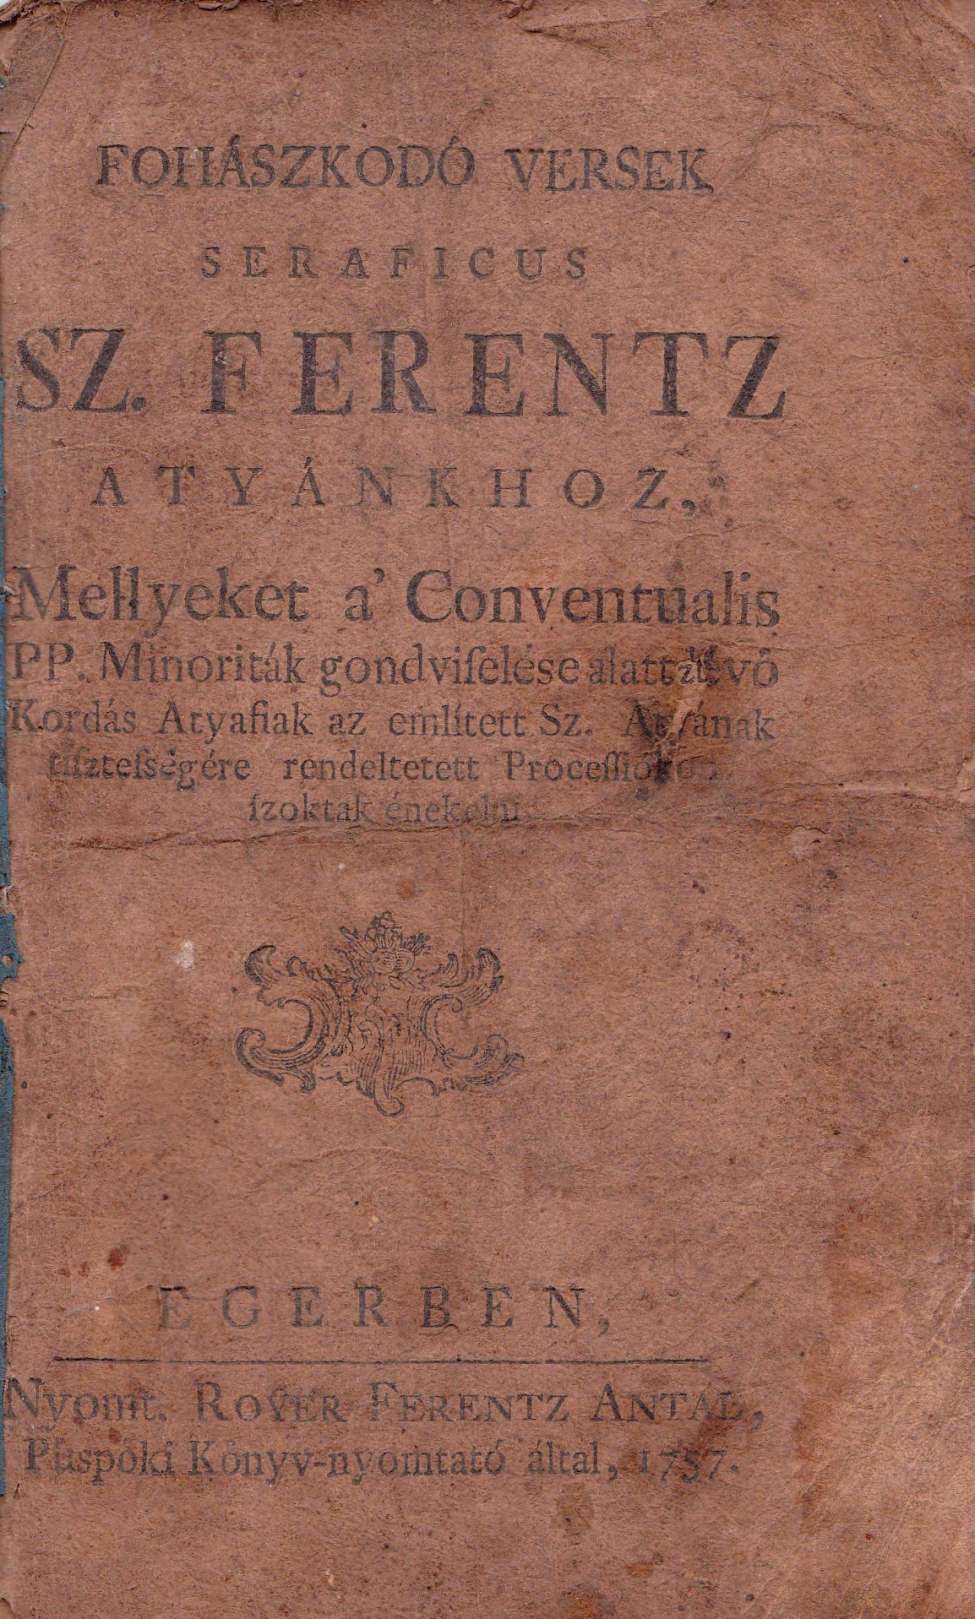 Book Cover For St. Ferentz Atyankhoz